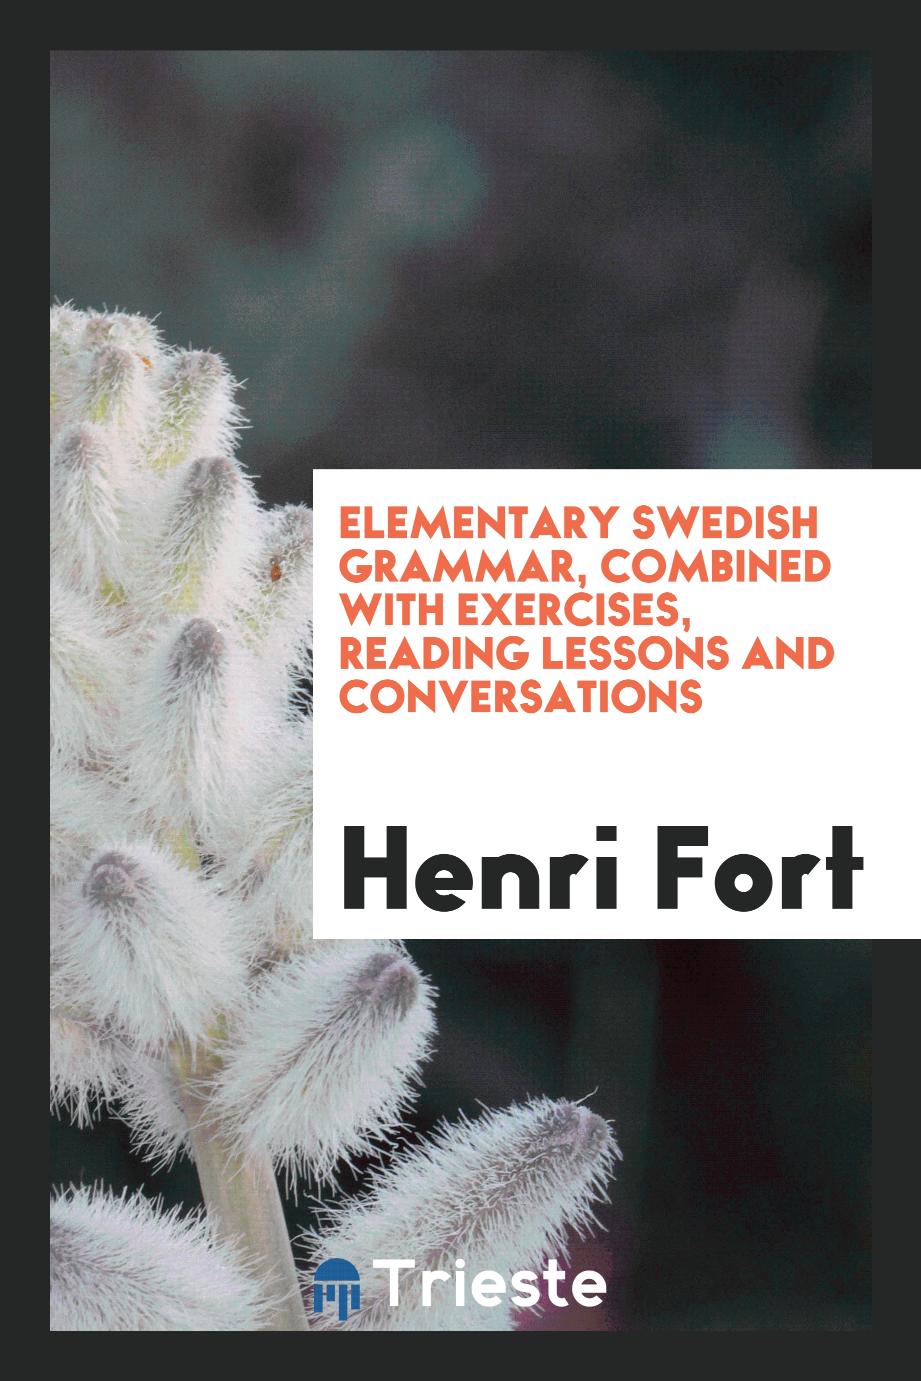 Elementary Swedish Grammar, Combined with Exercises, Reading Lessons and Conversations